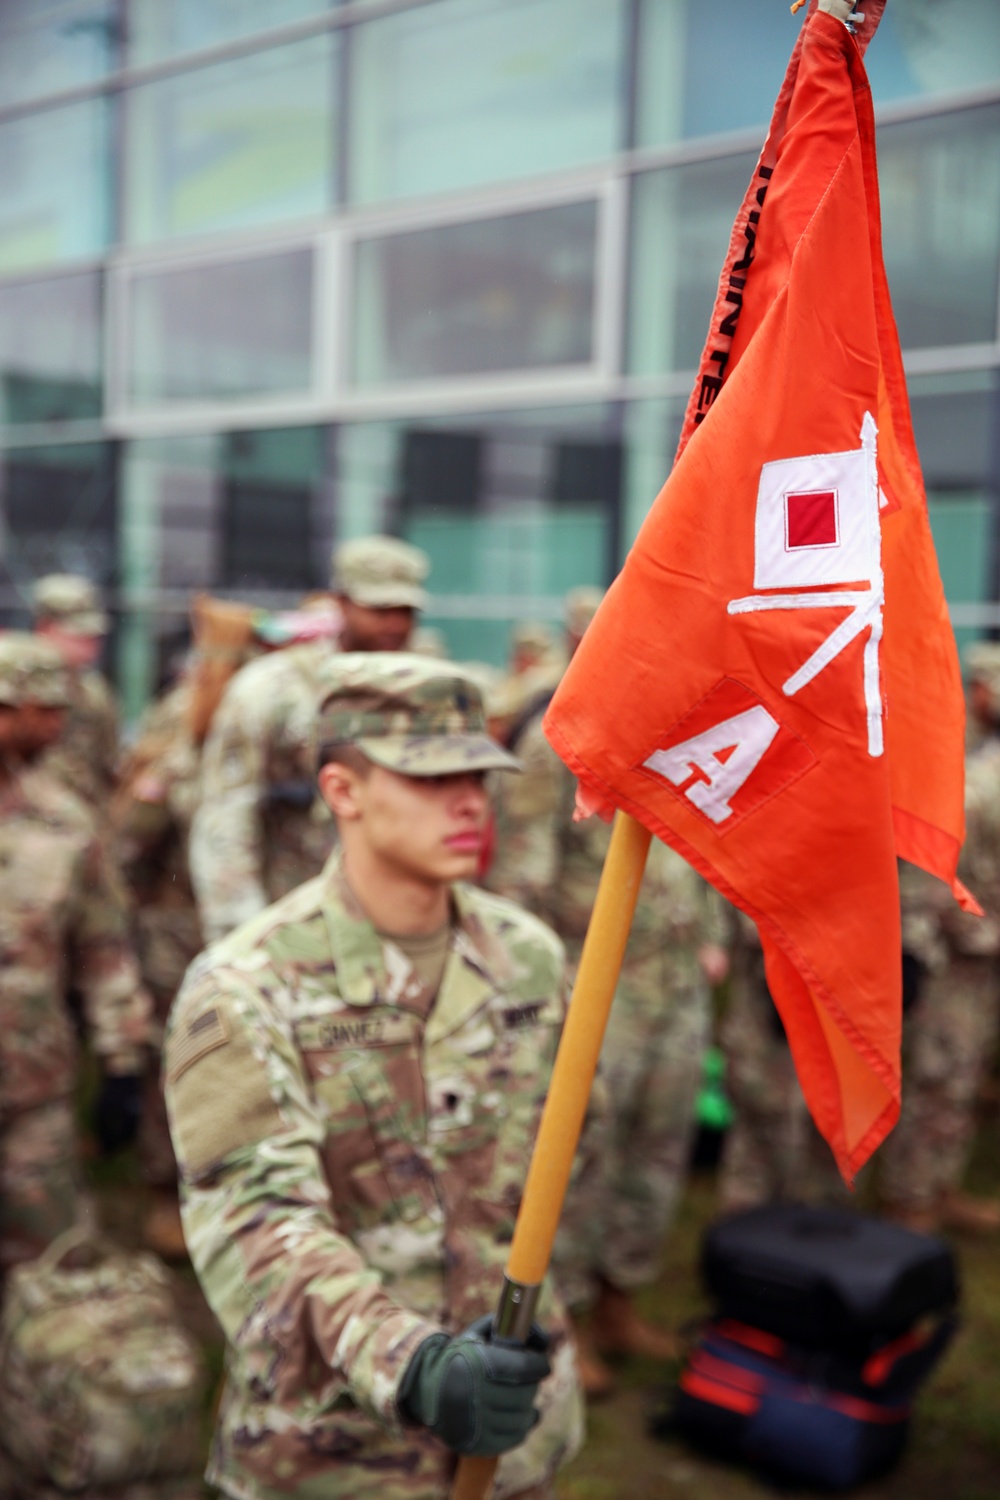 US Soldiers arrive in Poland to provide Signal support to Atlantic Resolve